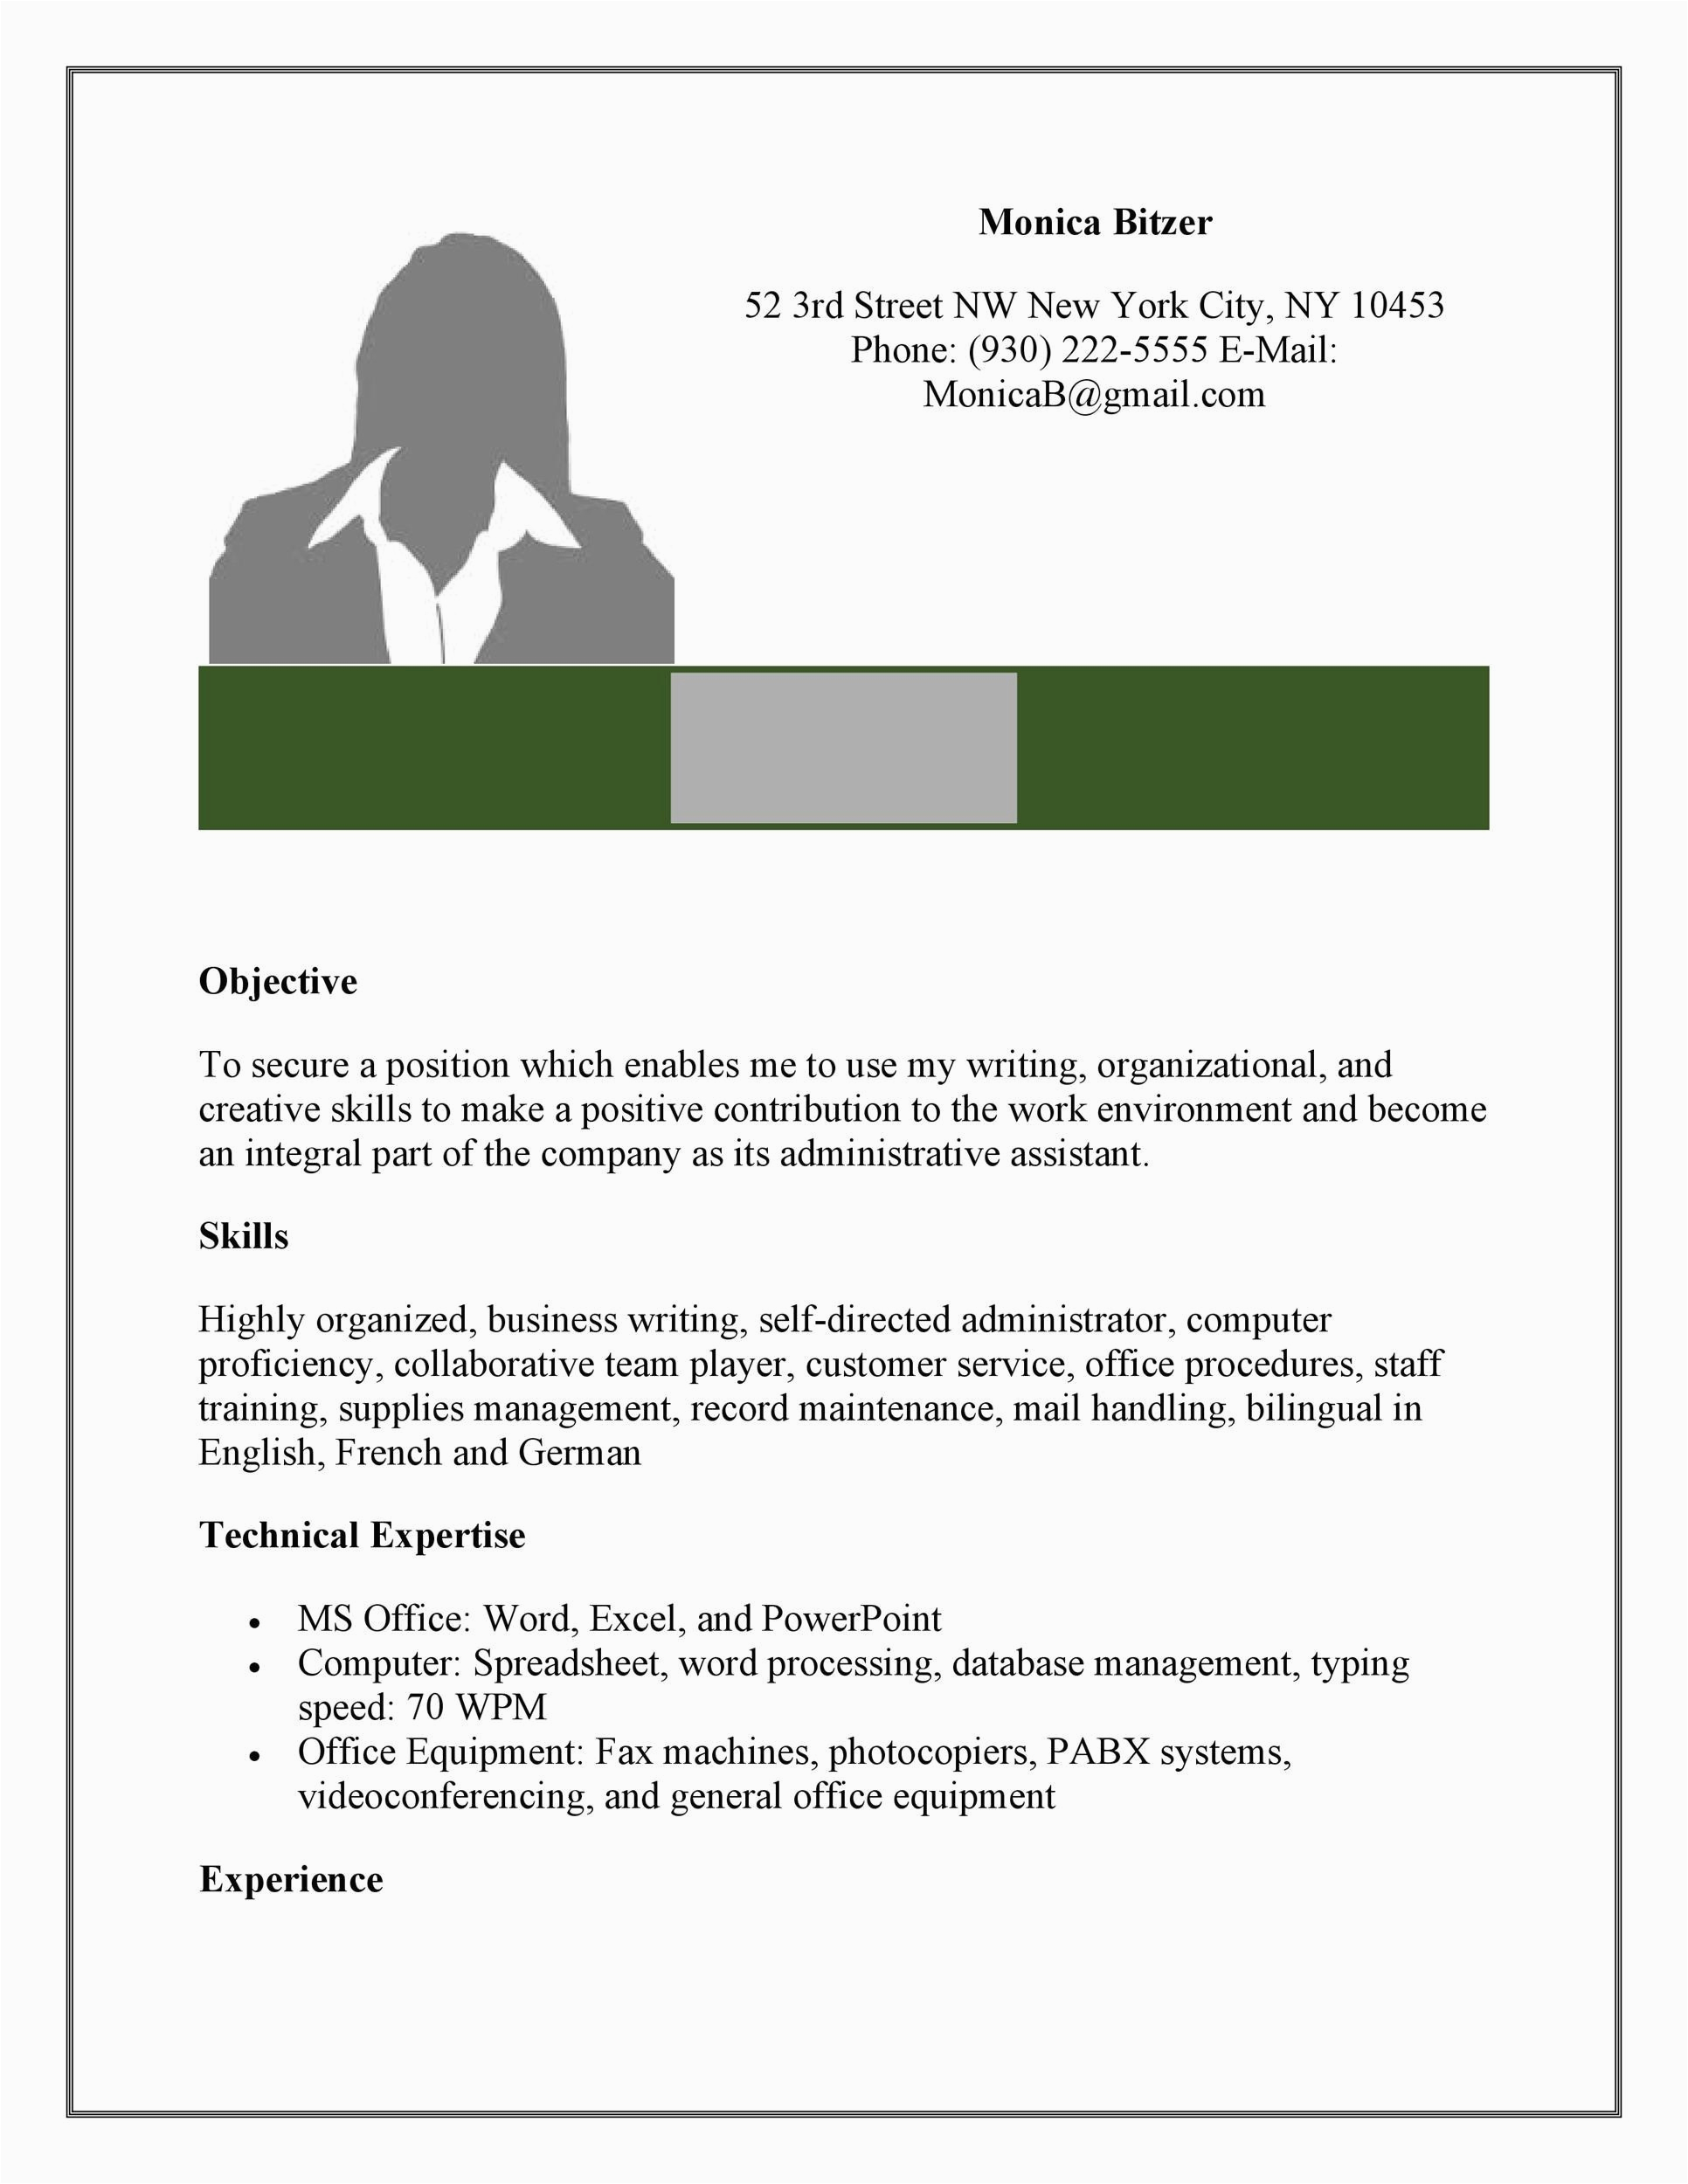 Sample Resume Templates for Administrative assistant 20 Free Administrative assistant Resume Samples Templatelab